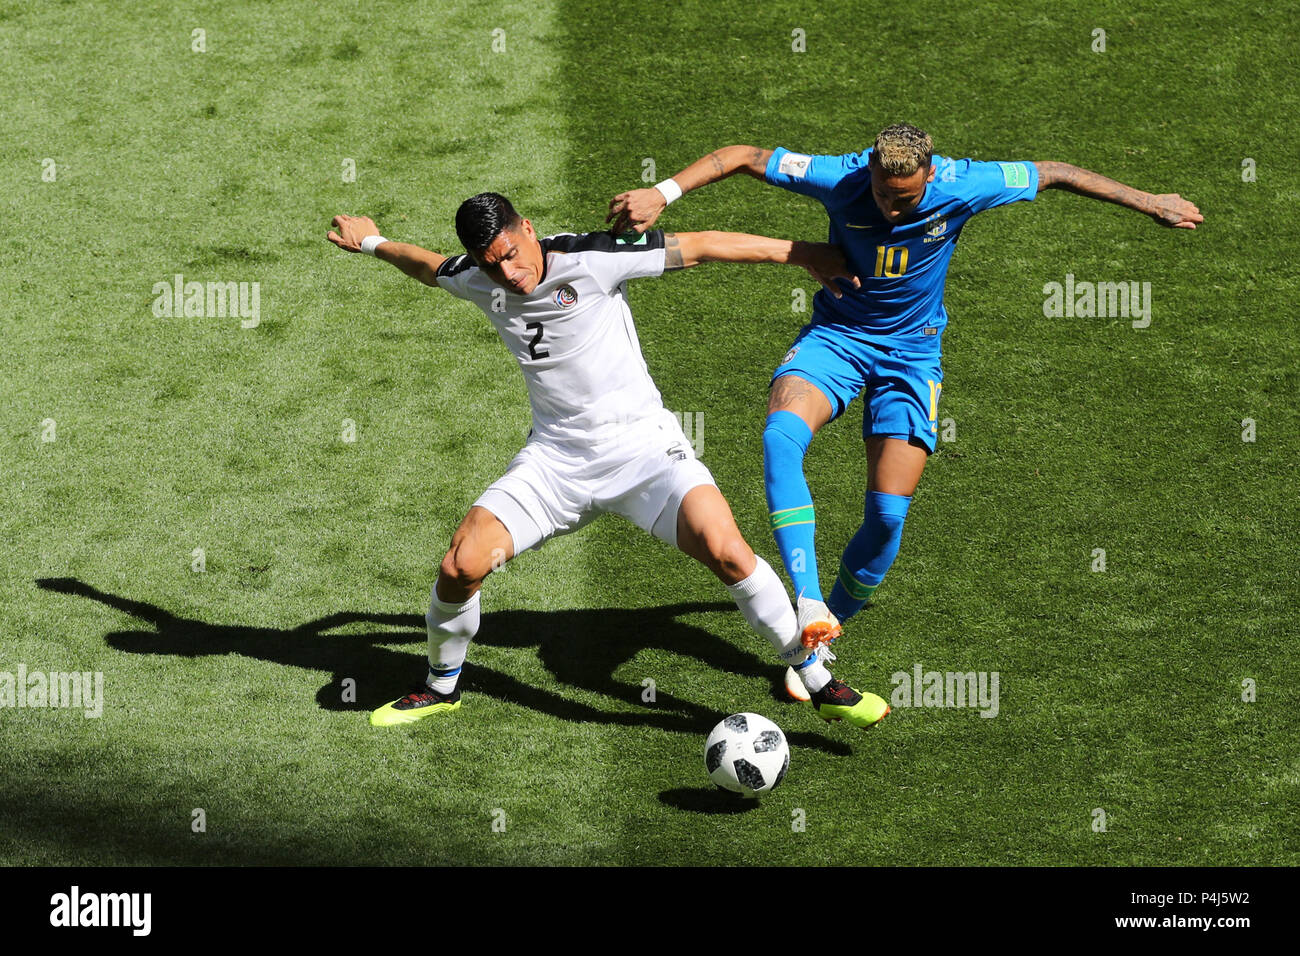 Costa Rica's Johnny Acosta (left) and Brazil's Neymar battle for the ball during the FIFA World Cup Group E match at Saint Petersburg Stadium, Russia. Stock Photo